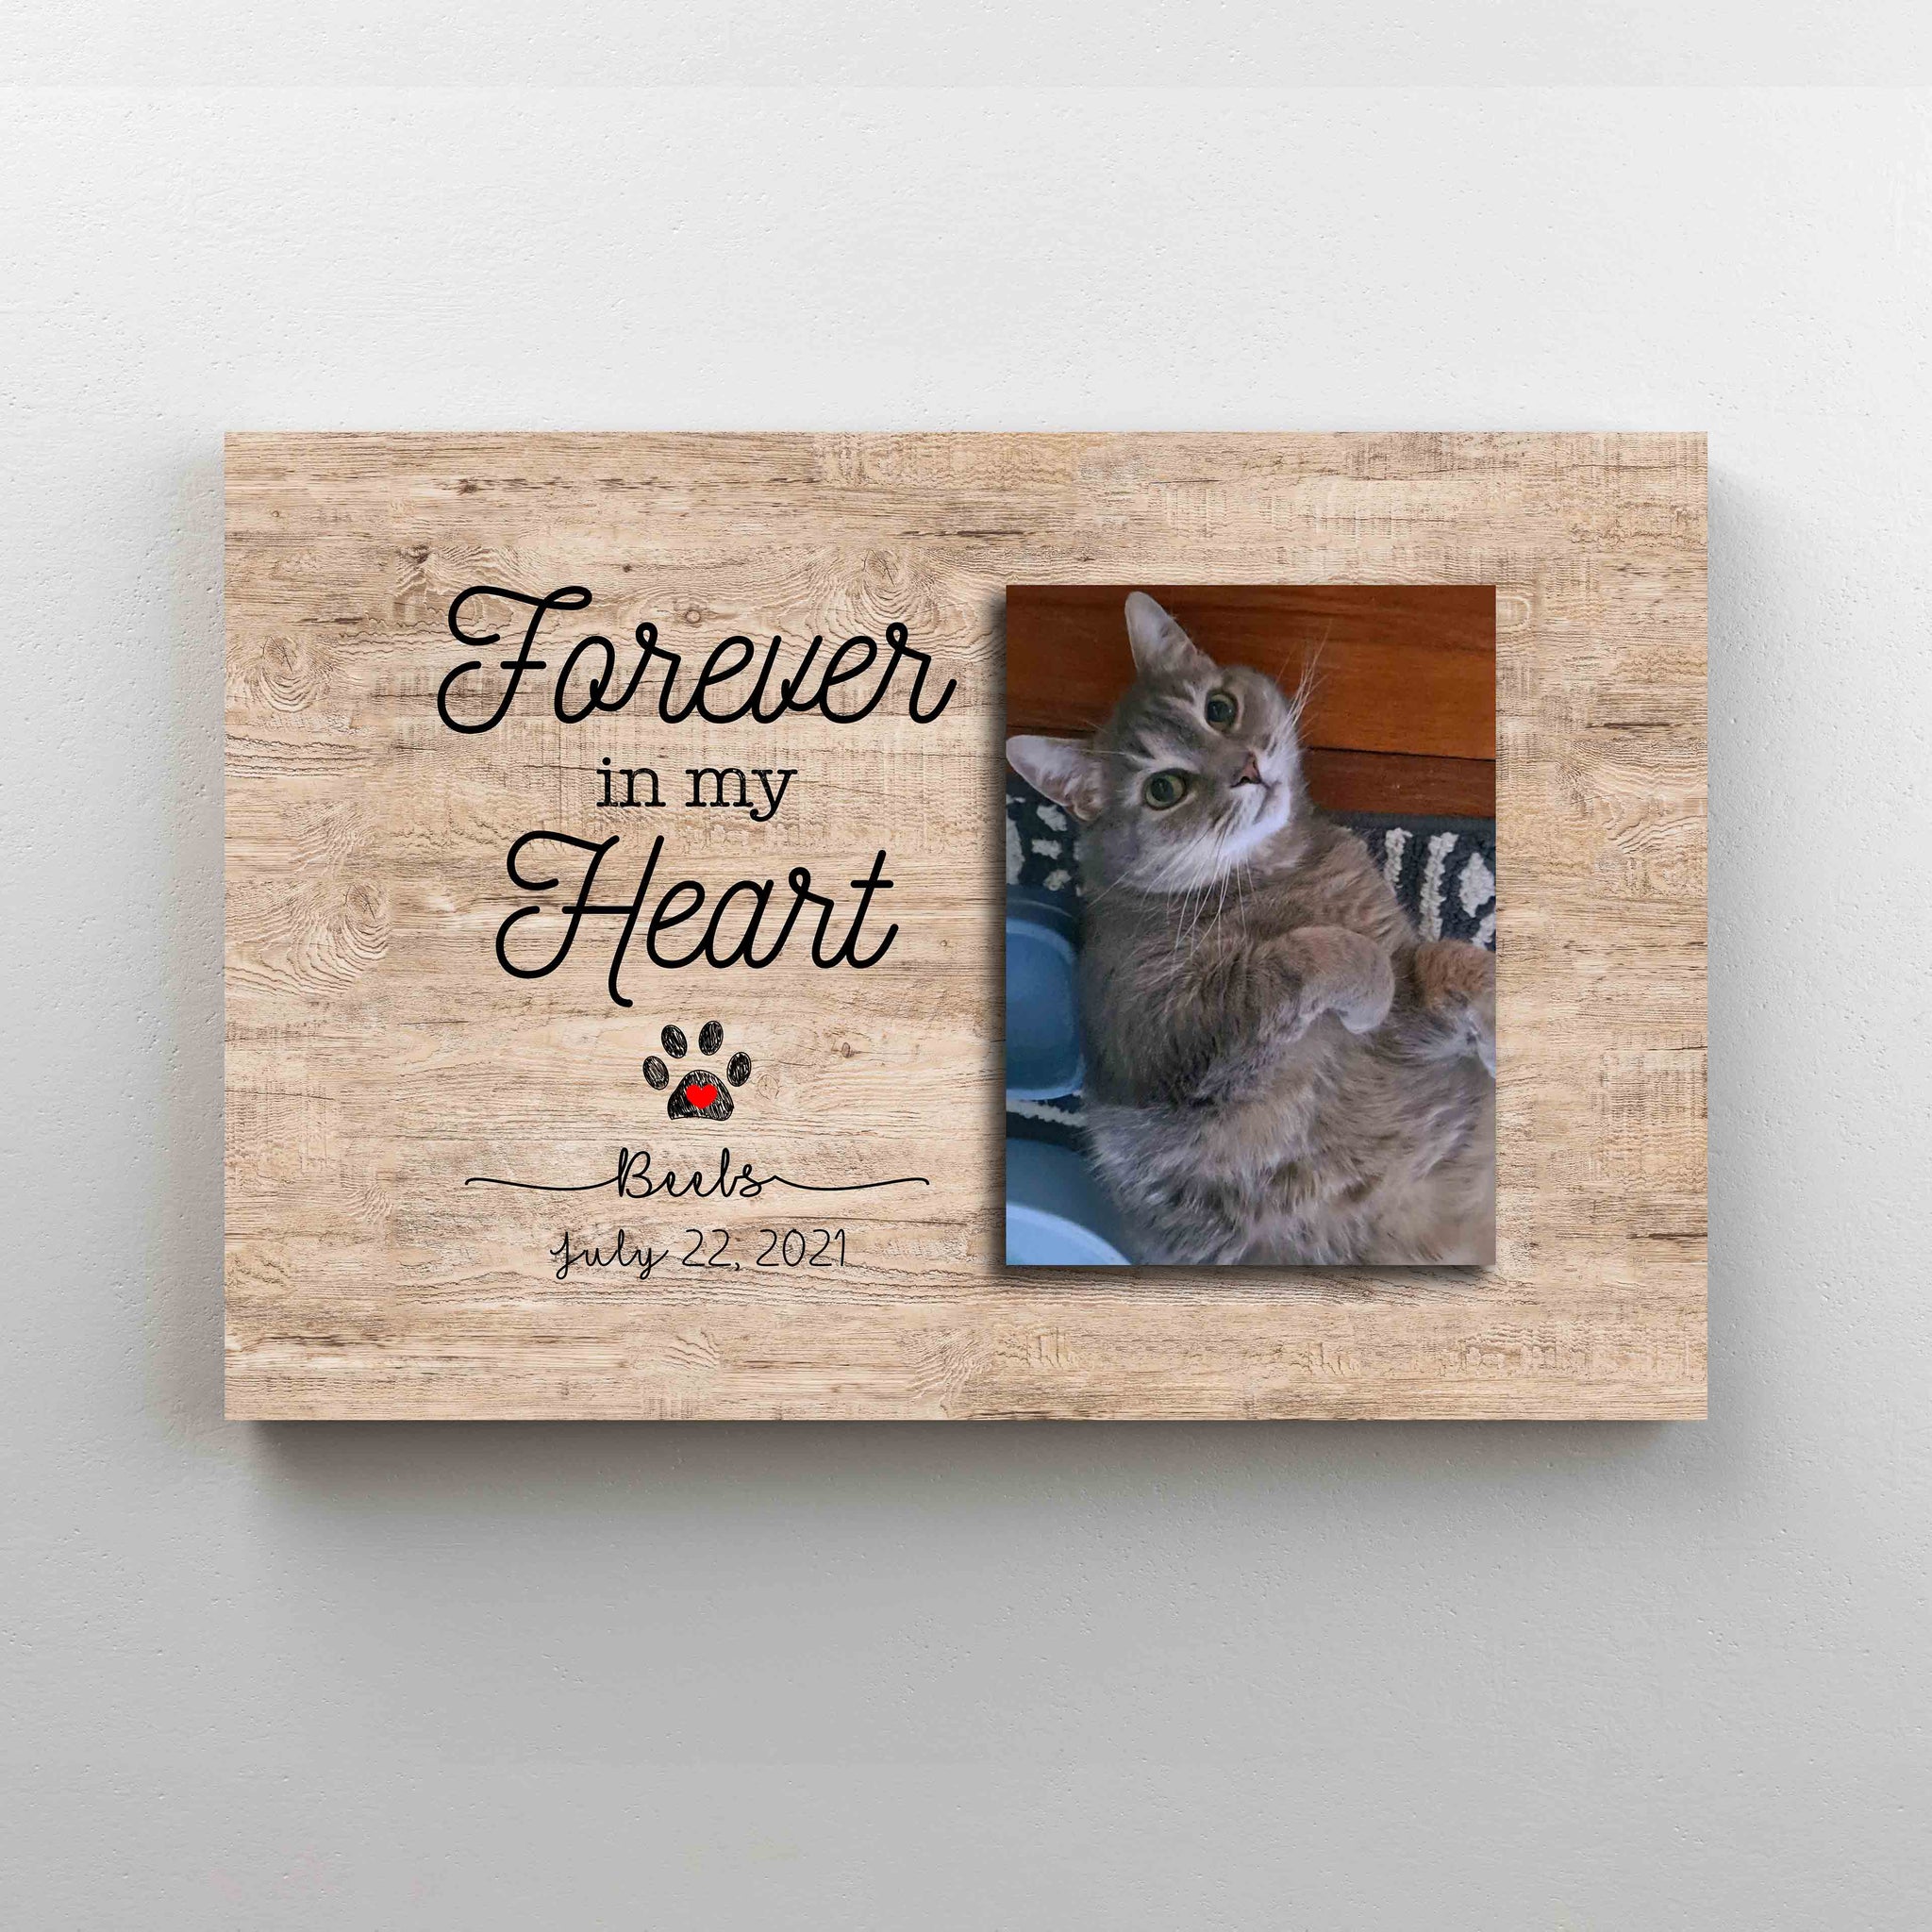 Personalized Image Canvas, Forever In My Heart Canvas, Pet Memorial Canvas, Wall Art Canvas